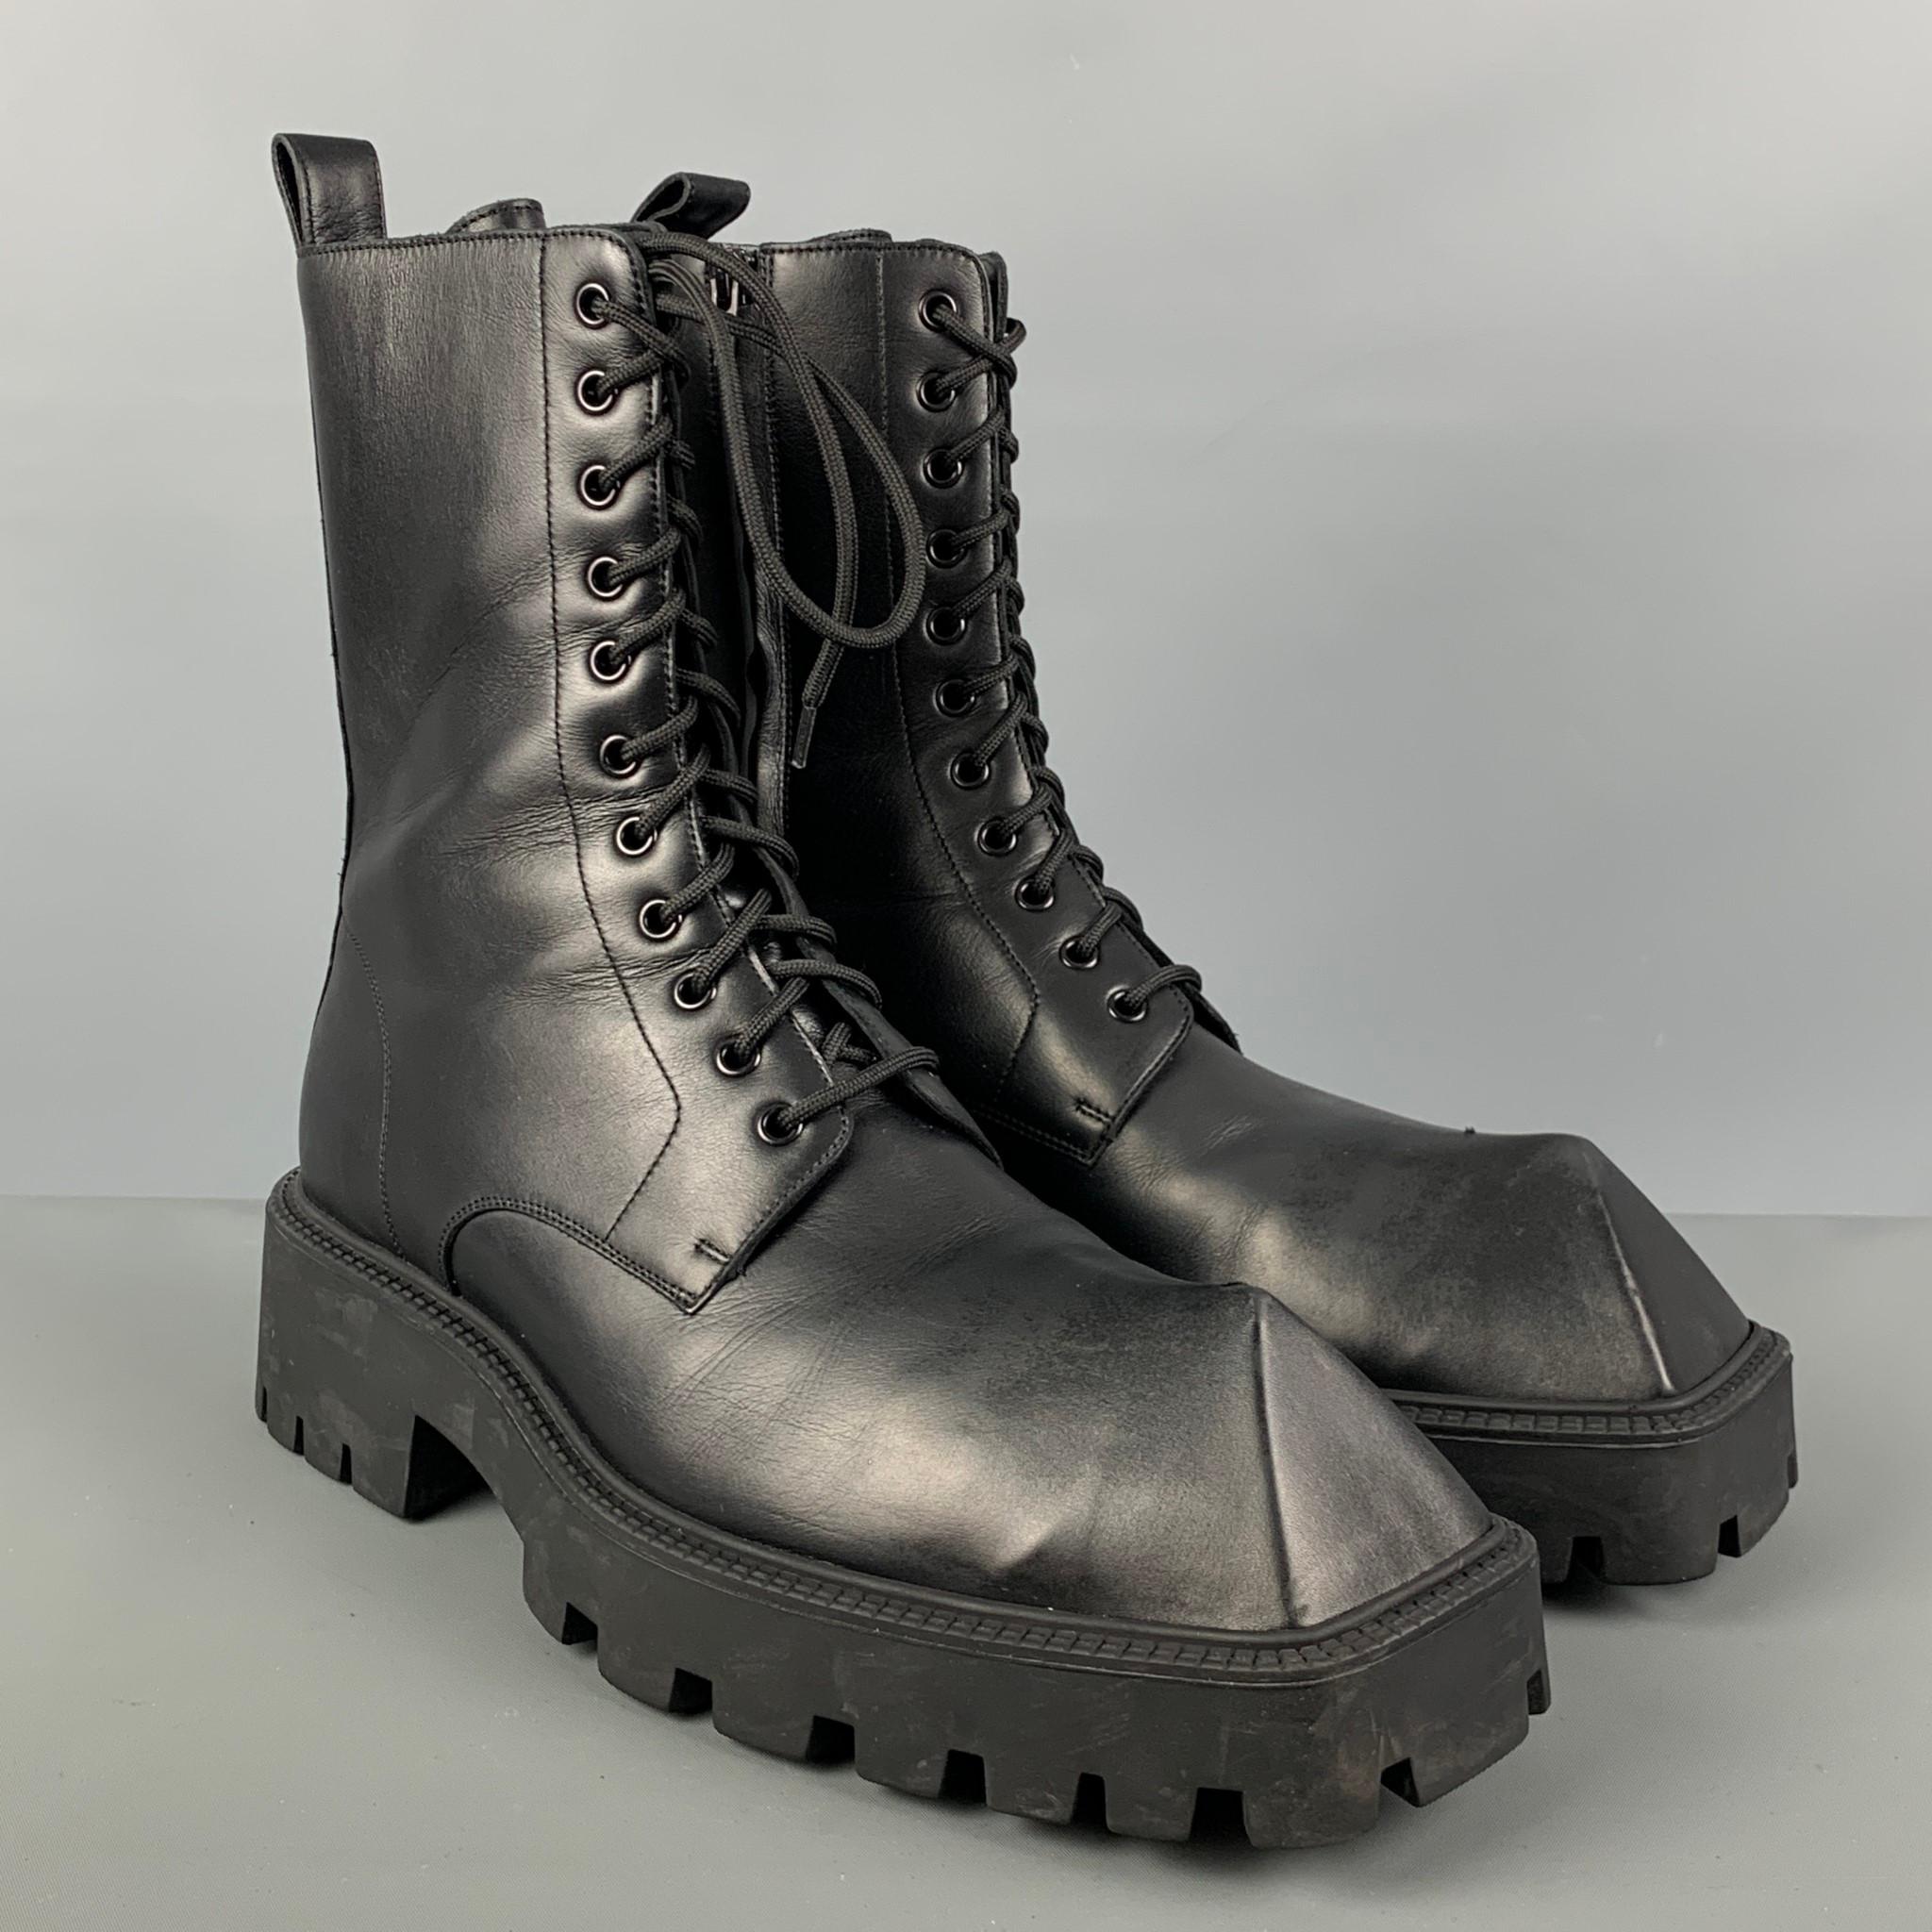 BALENCIAGA 'RHINO' boots comes in a black calf skin leather featuring a chunky design, pyramid toe shape, tick toothed out rubber sole, and a lace up closure. Made in Italy.

Very Good Pre-Owned Condition. Minor mark on top of left boot.
Marked: